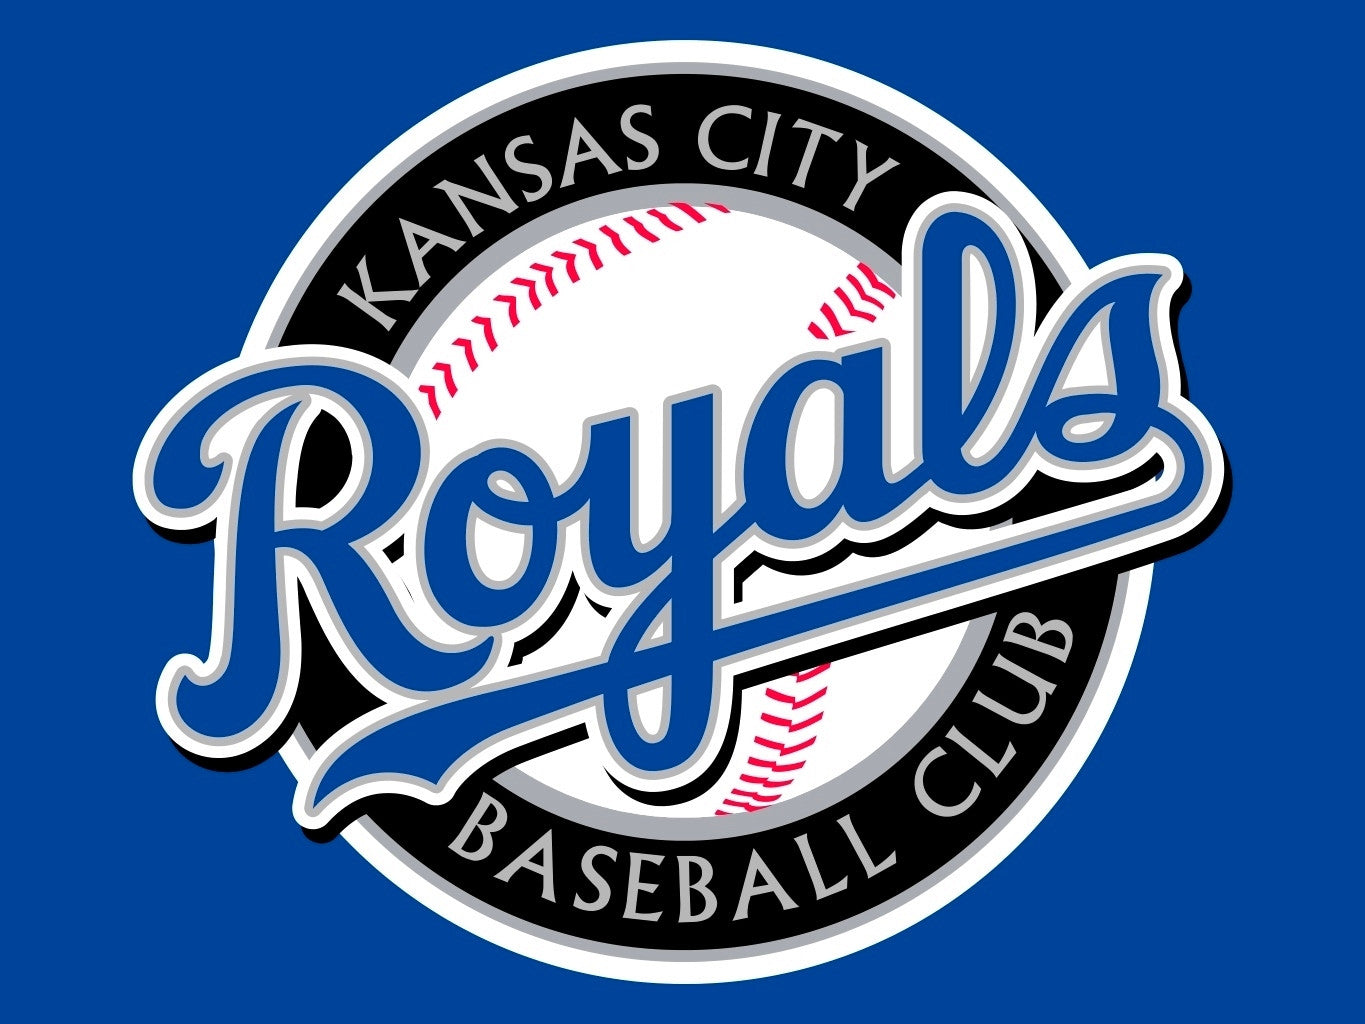 Kansas City Royals New Uniforms Honor Old & Busted Fountain Logo